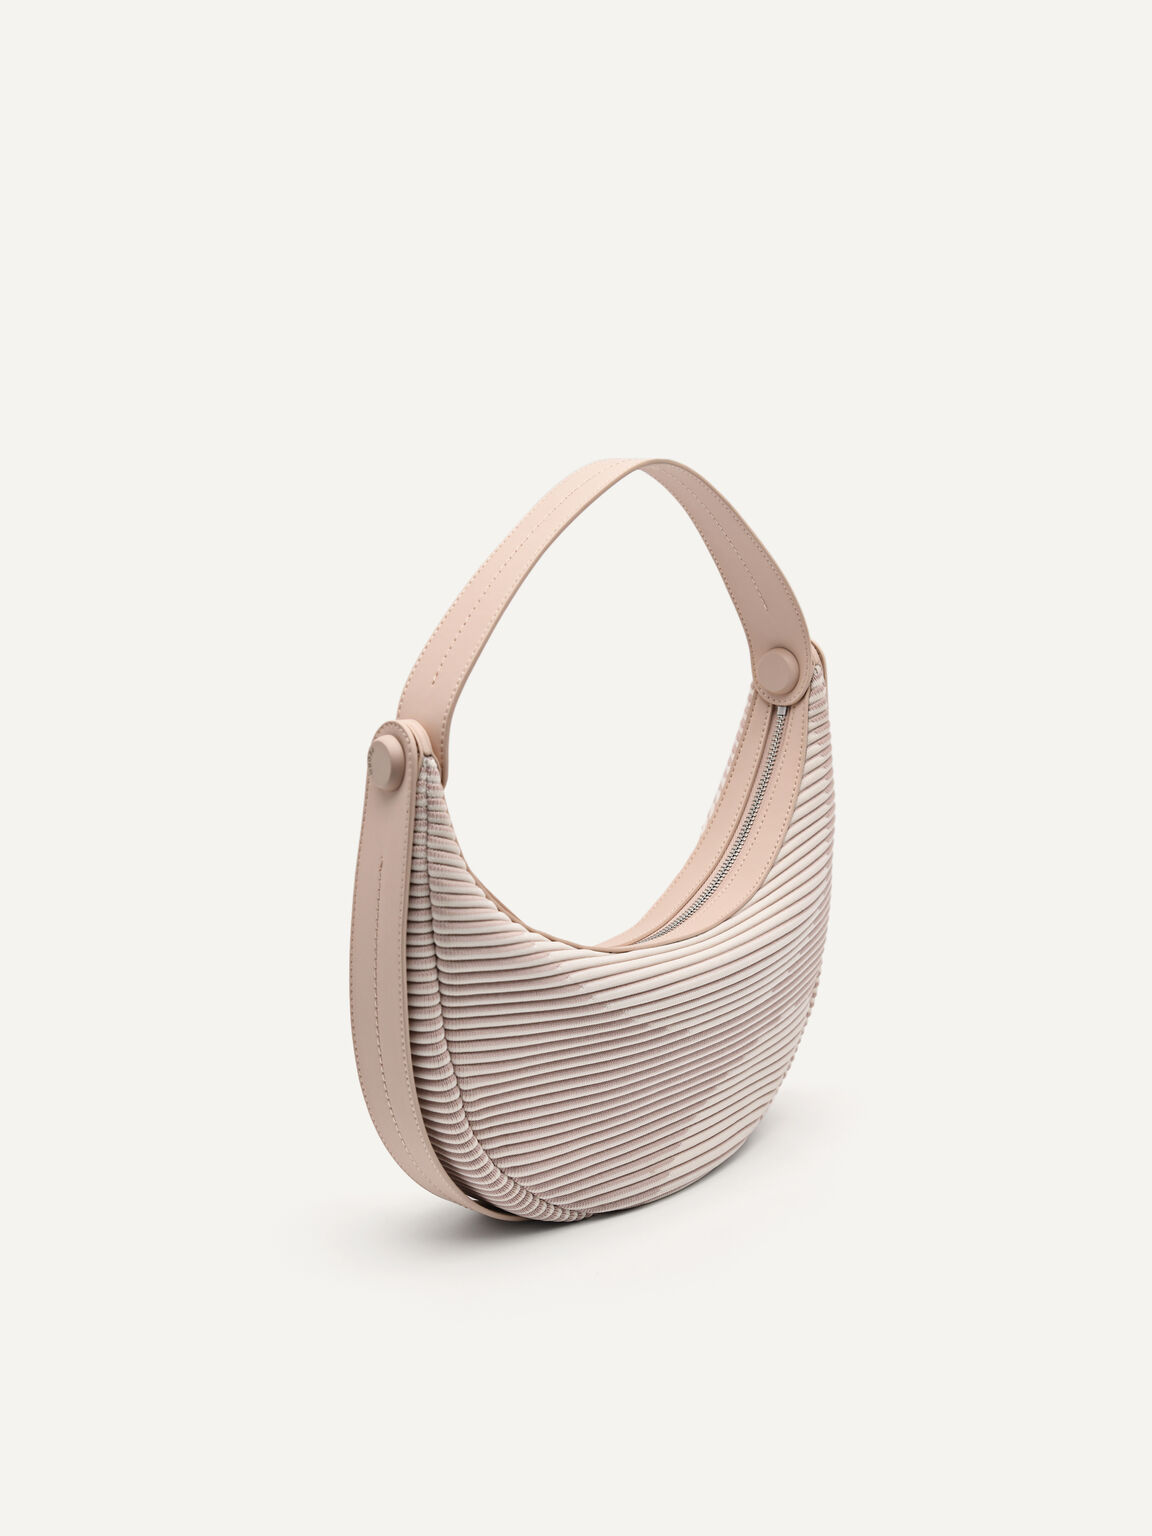 rePEDRO Pleated Shoulder Bag, Nude